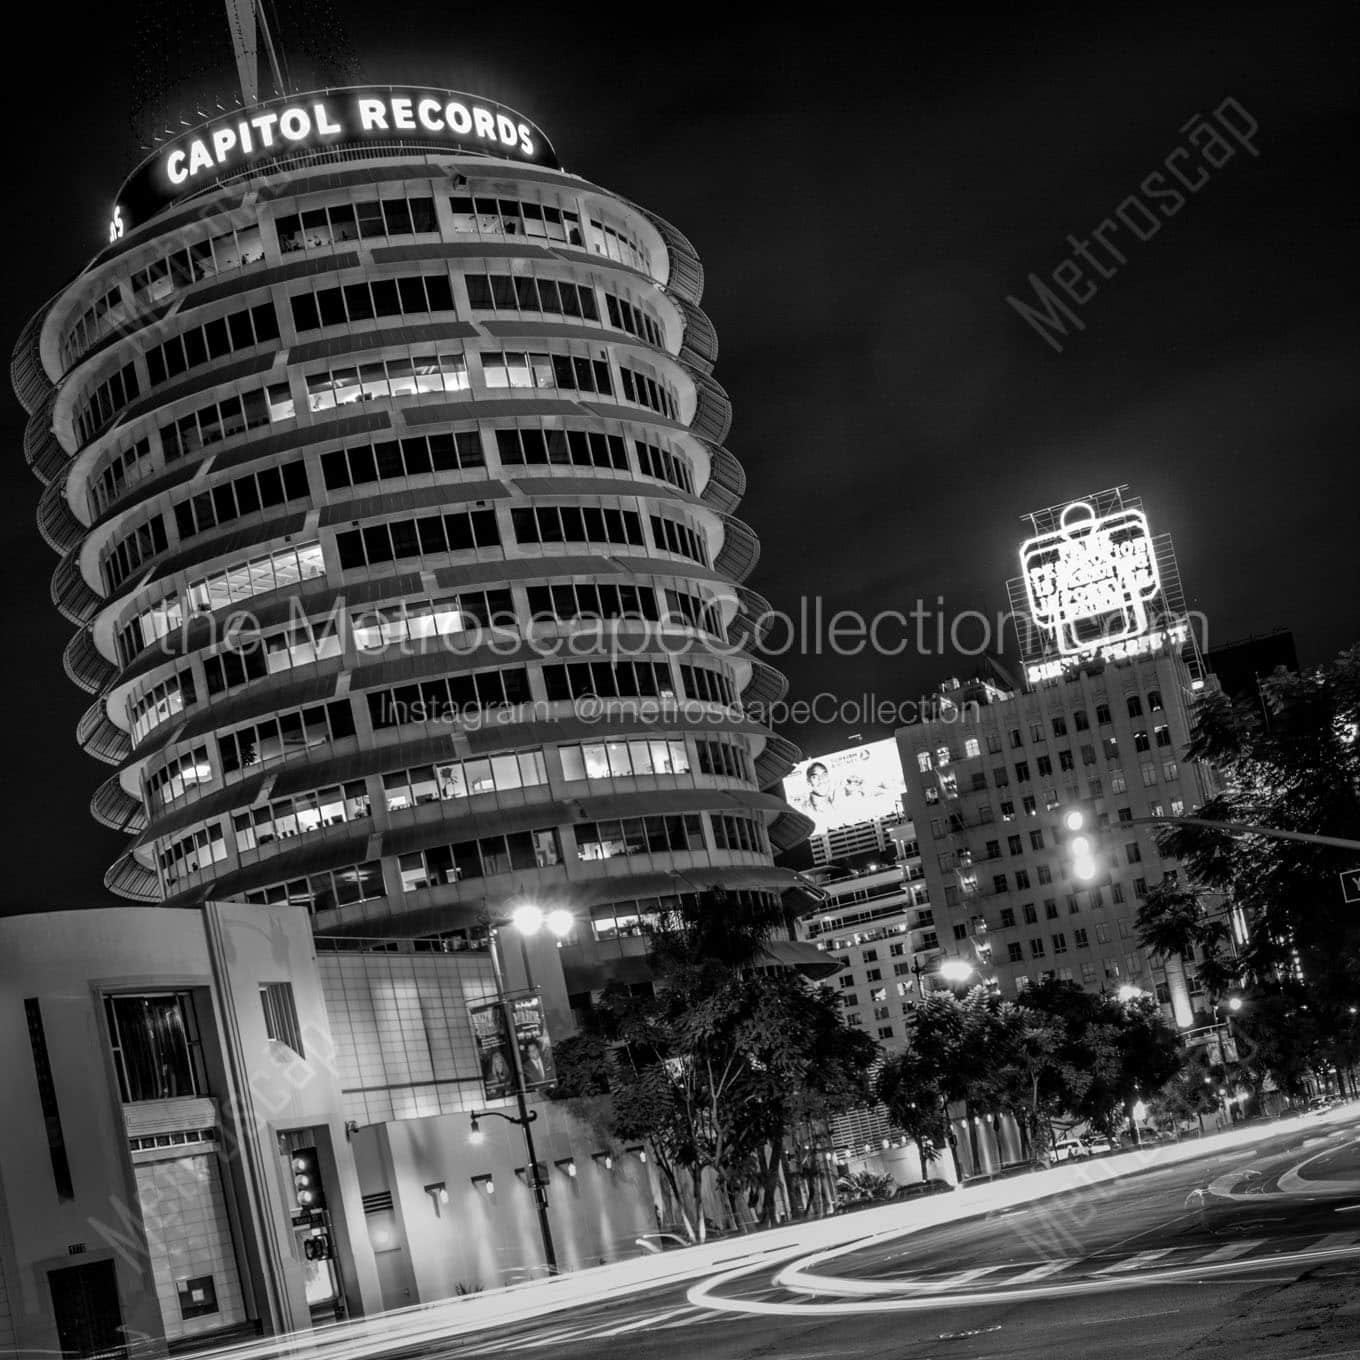 capitol records building at night Black & White Office Art